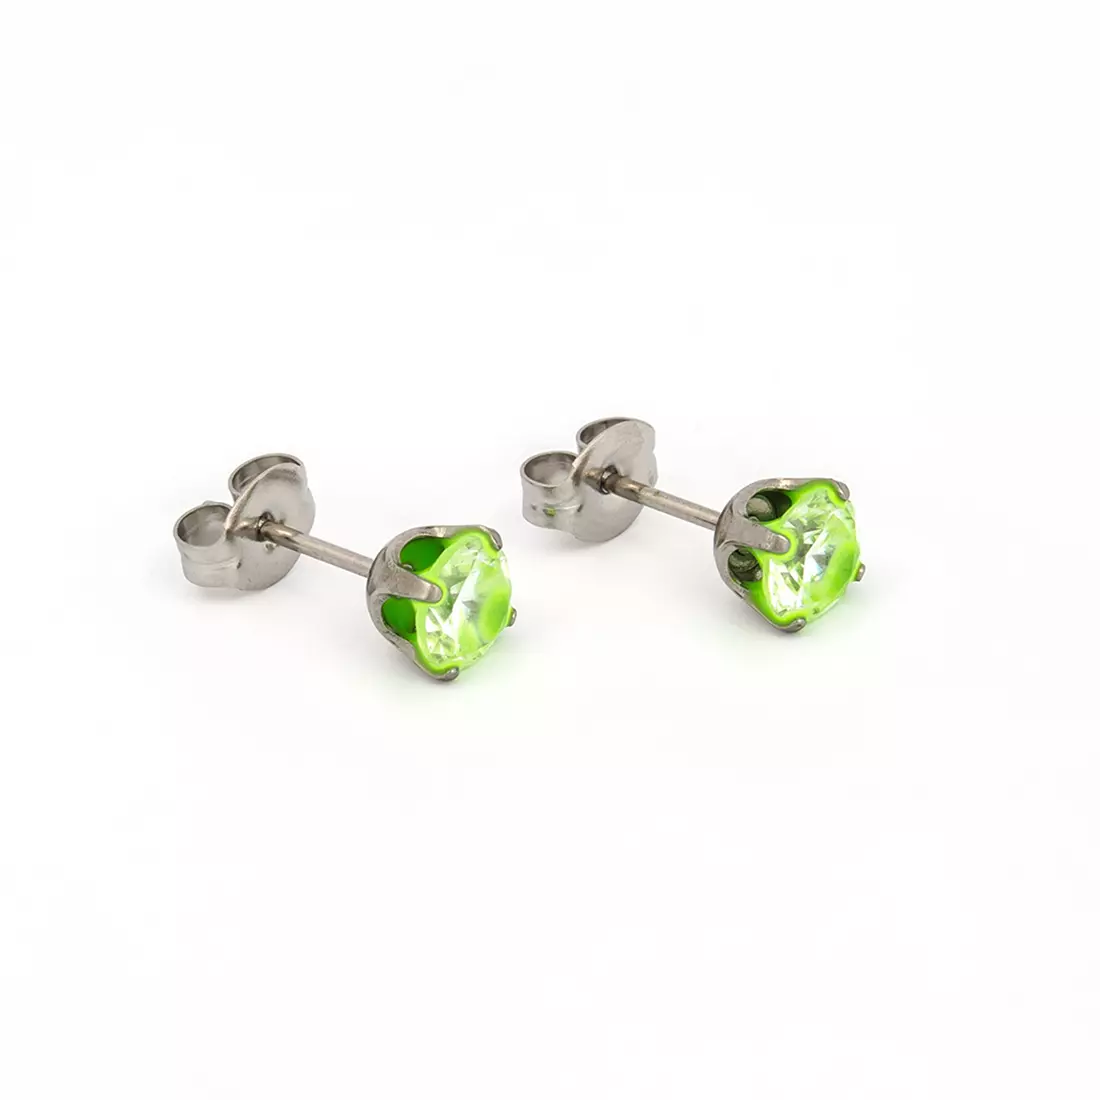 5MM Cubic Zirconia Neon Green Allergy Free Stainless Steel Ear Studs | Ideal for everyday wear